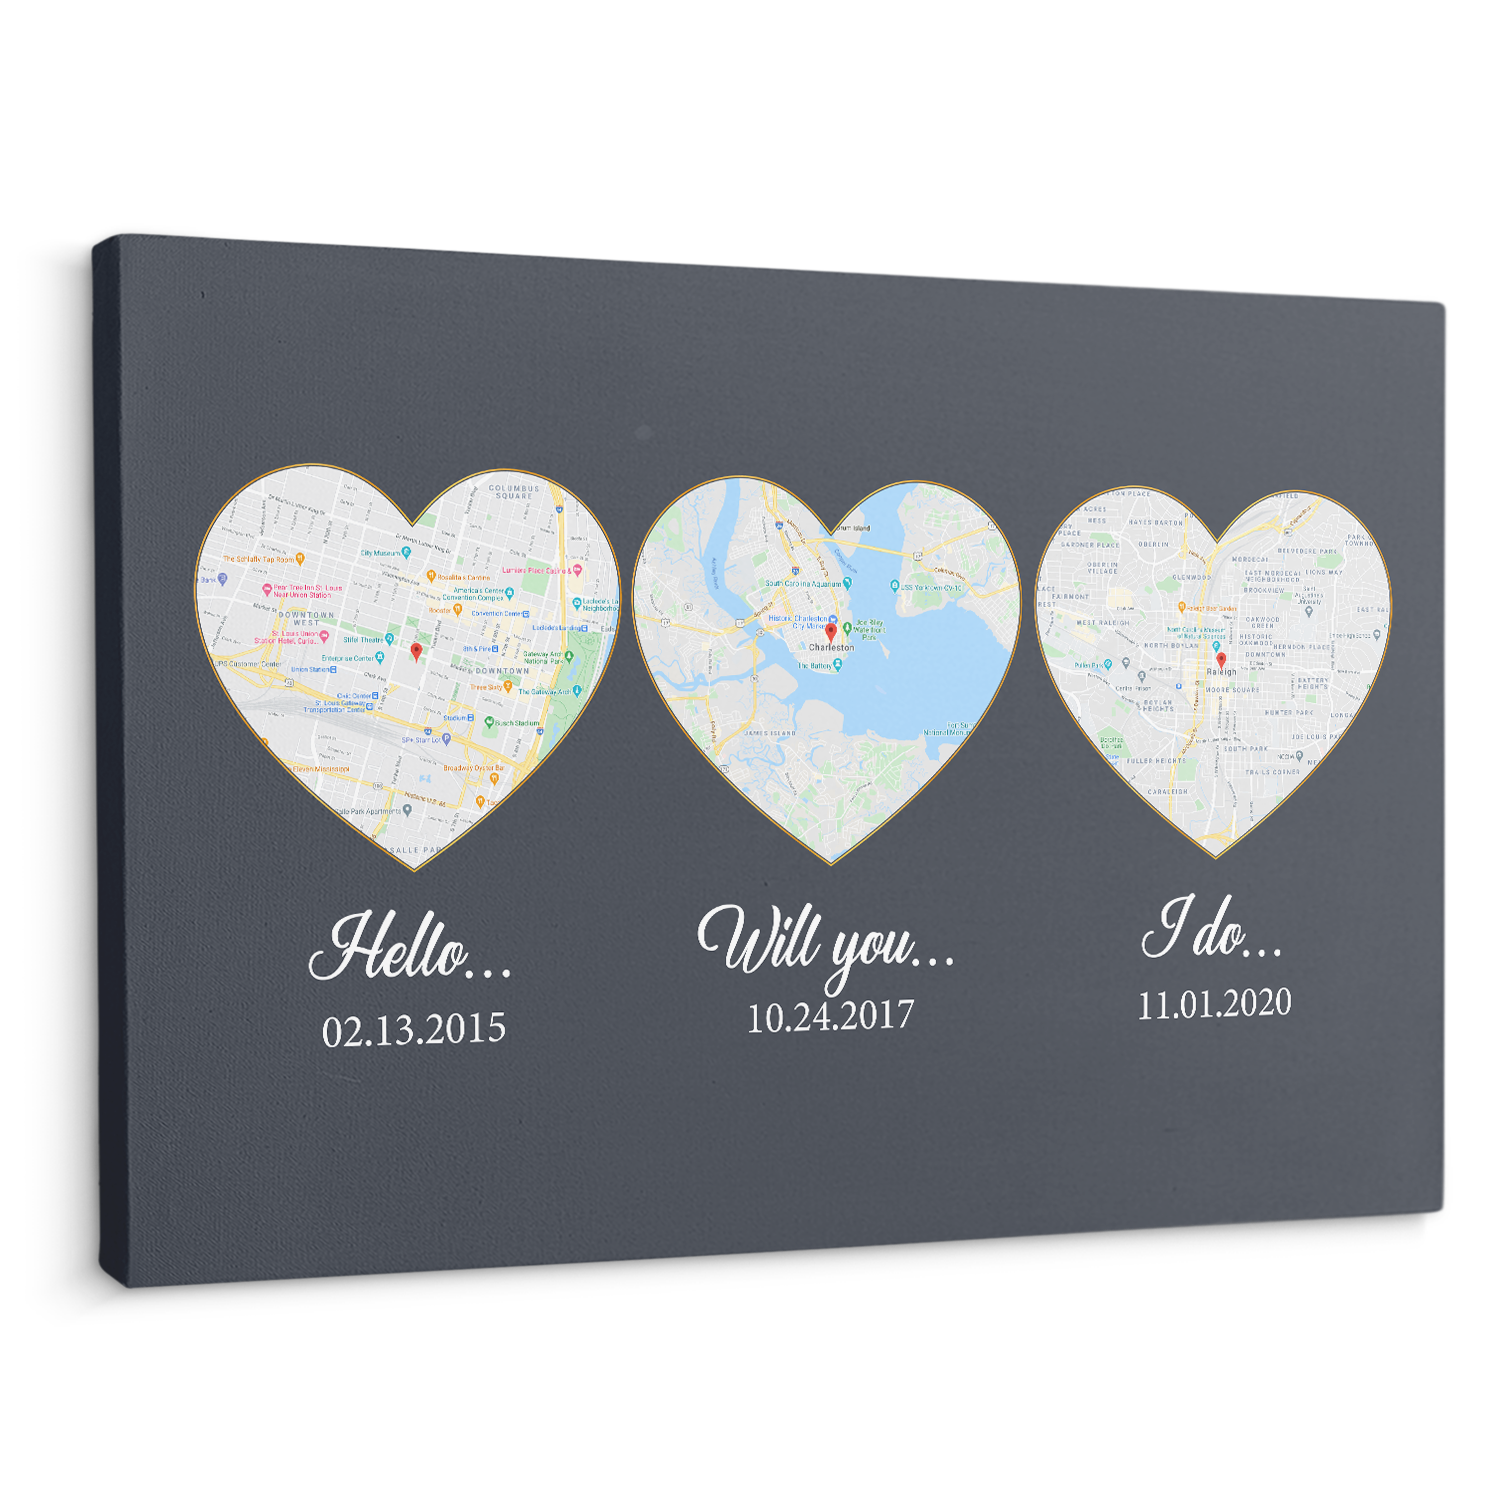 Our Love Story We Met She Said Yes We Said I Do Custom Map Print Navy Background Canvas